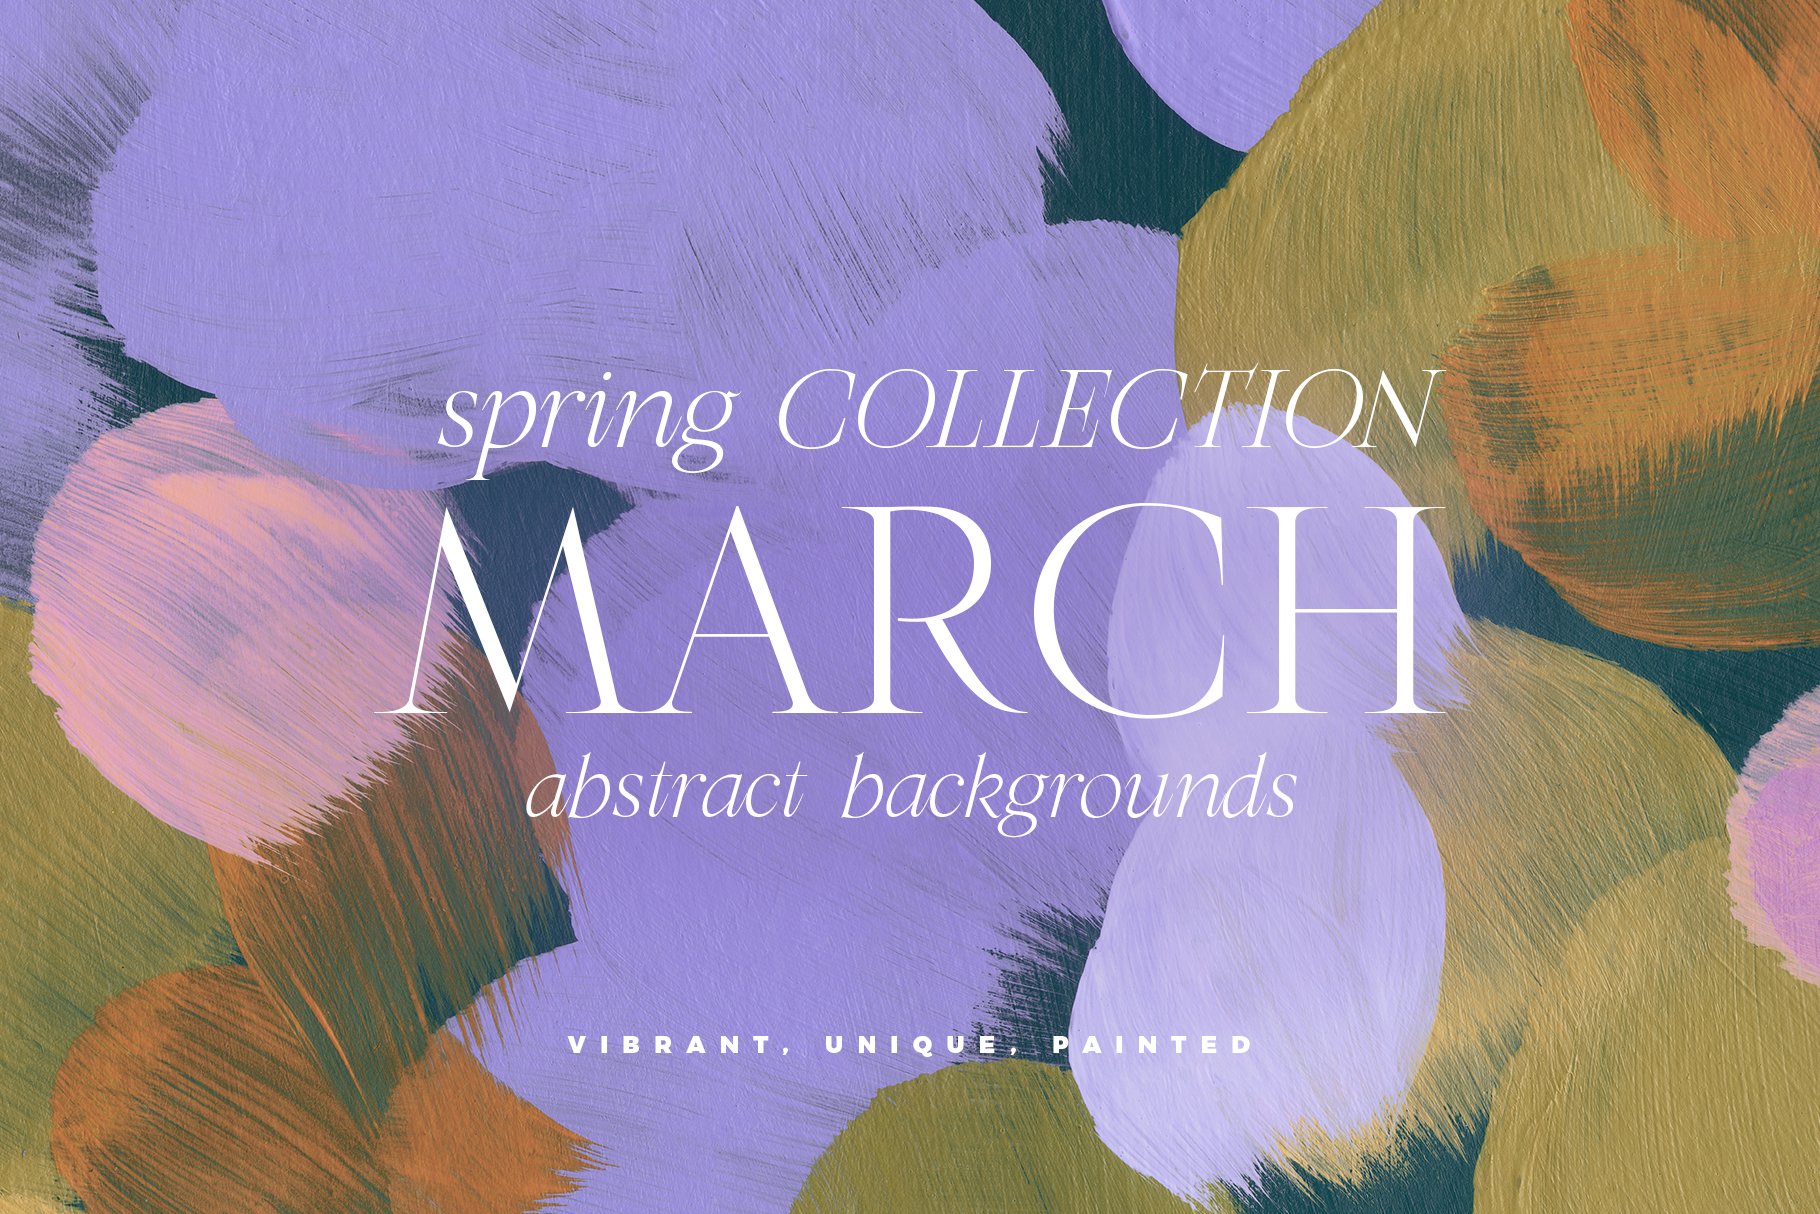 March Abstract Painted Backgrounds cover image.